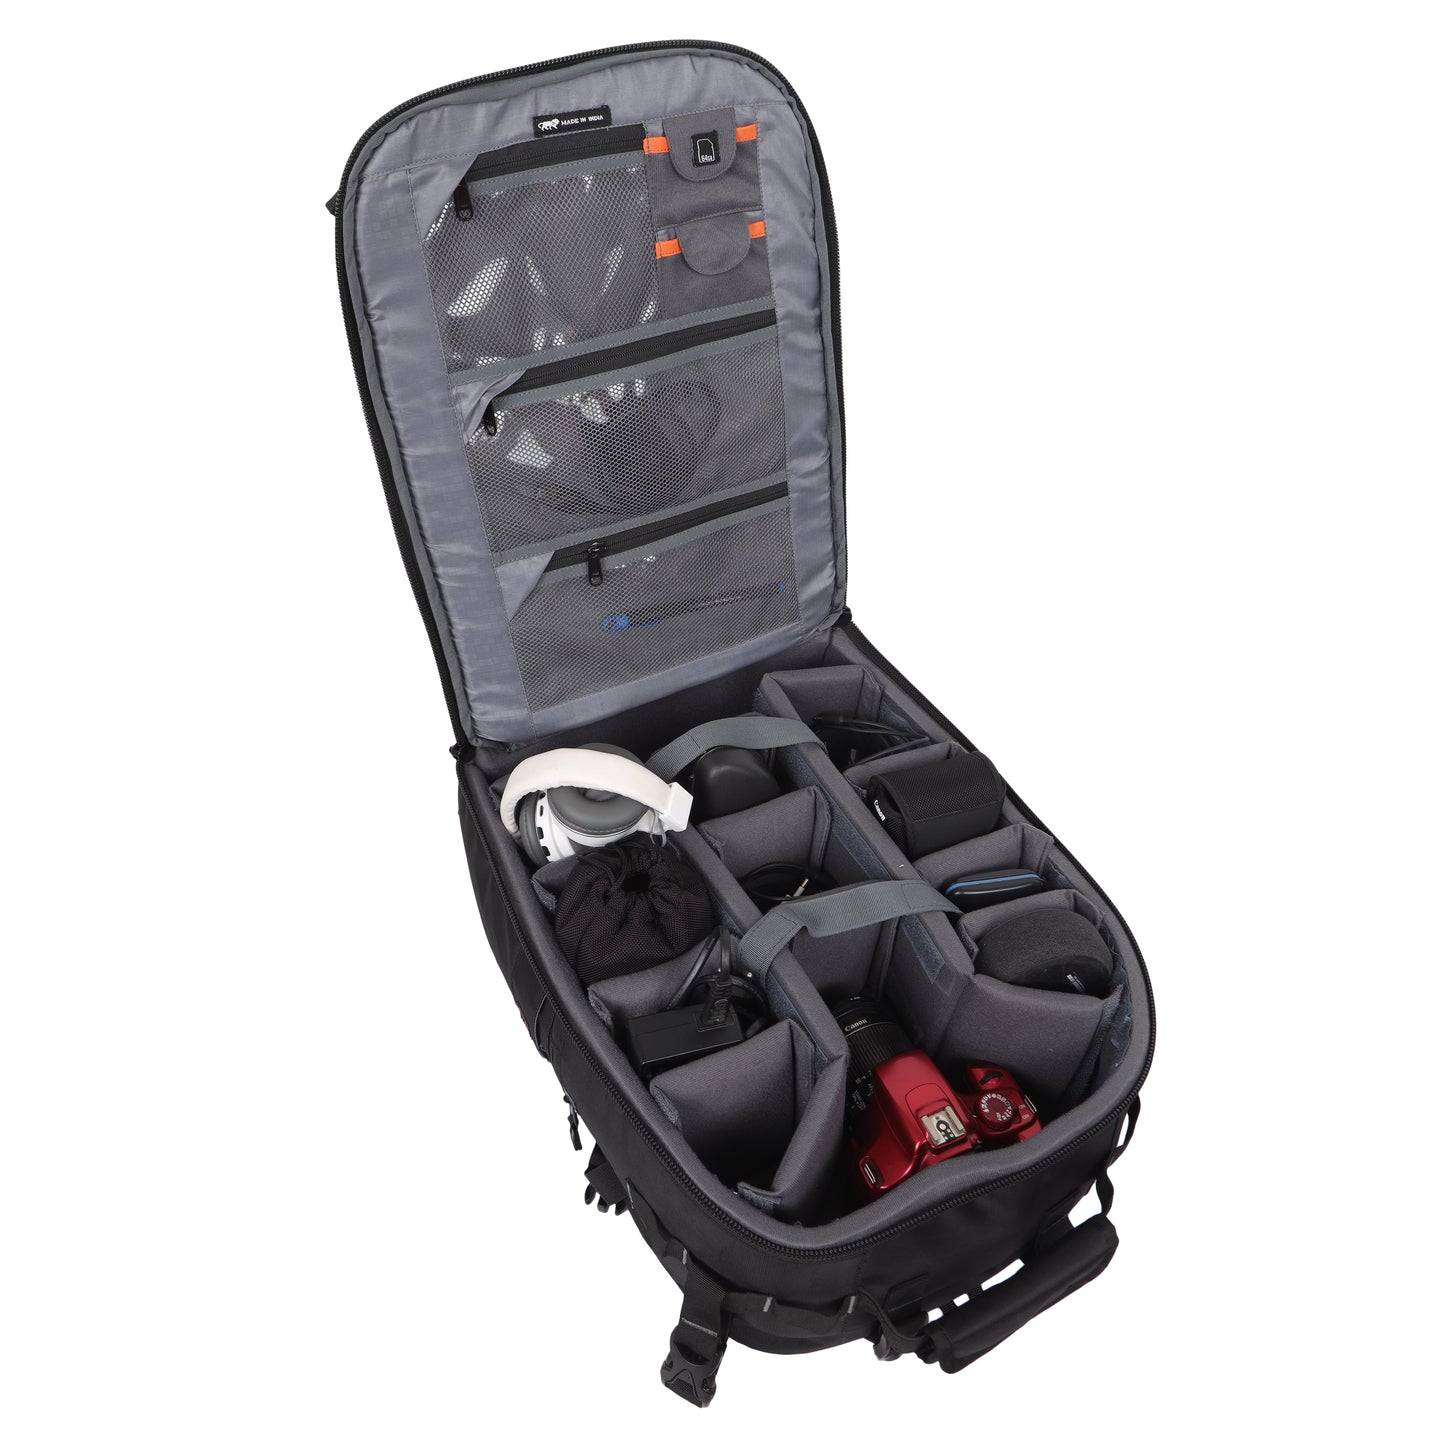 Image: Top view of the P70 Magnet DSLR camera bag, showcasing its spacious interior with cameras and equipment neatly organized. The bag offers versatile compartments and customizable dividers for efficient gear storage. Experience convenience and protection with the P70 Magnet camera bag.